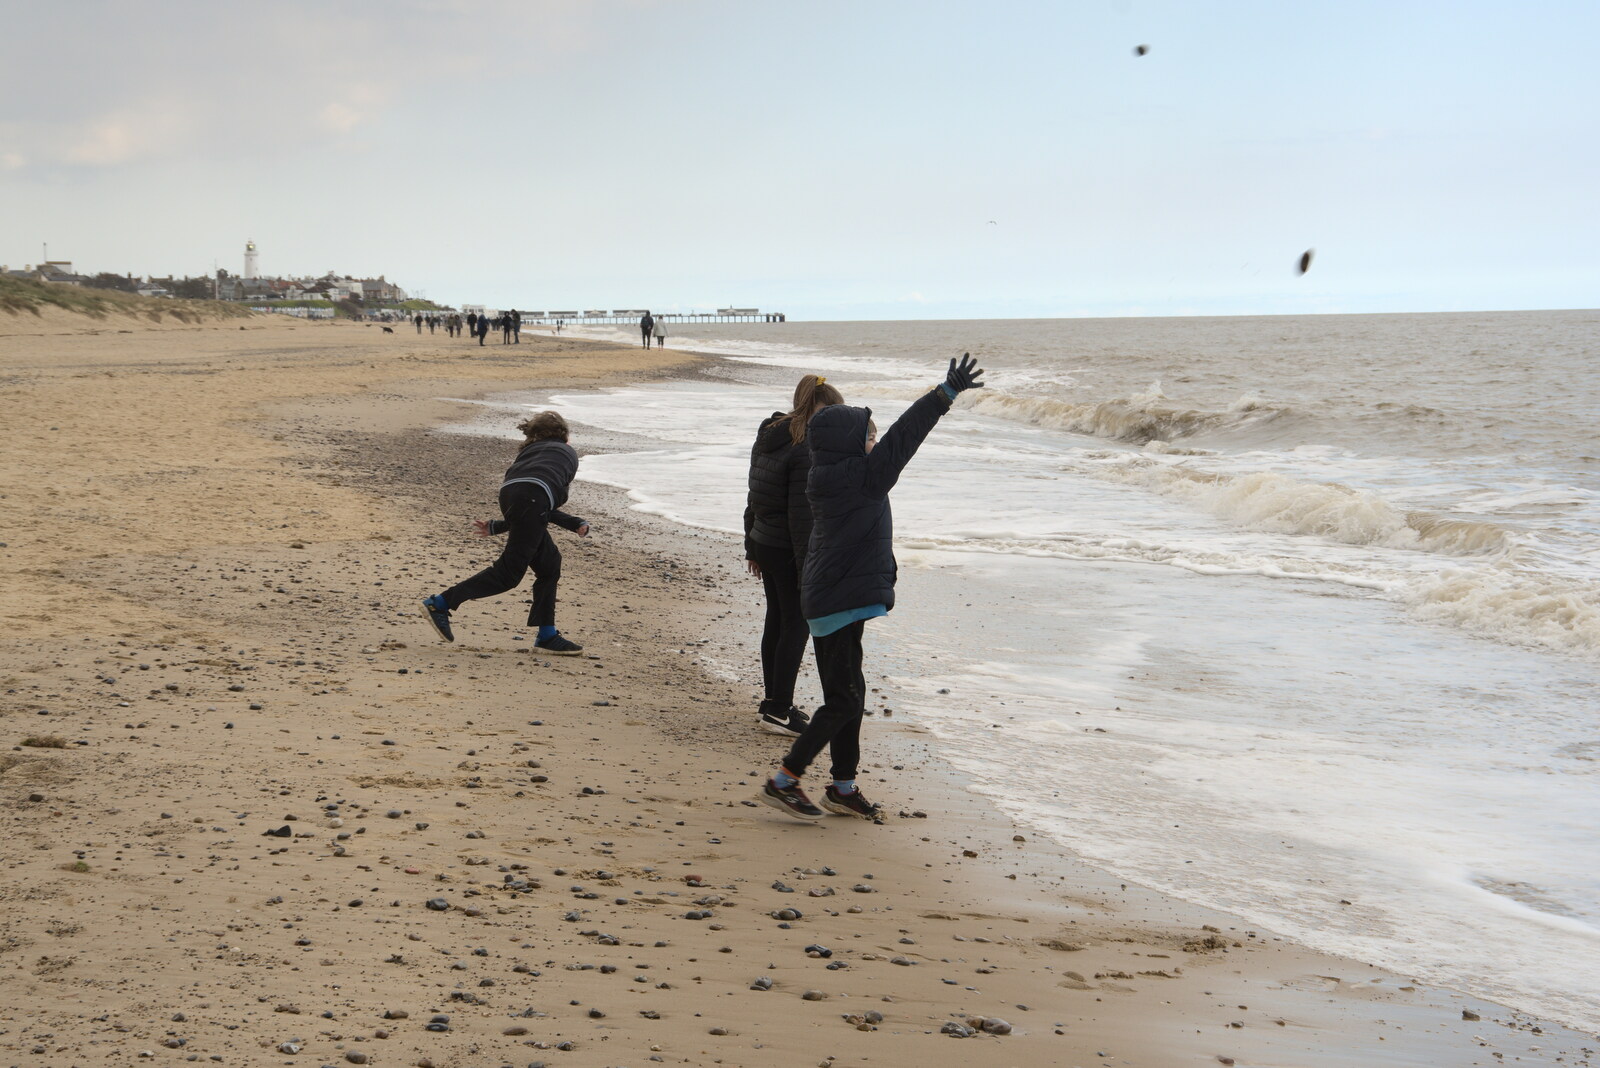 Fred and Harry hurl stones at the sea from A Chilly Trip to the Beach, Southwold Harbour, Suffolk - 2nd May 2021